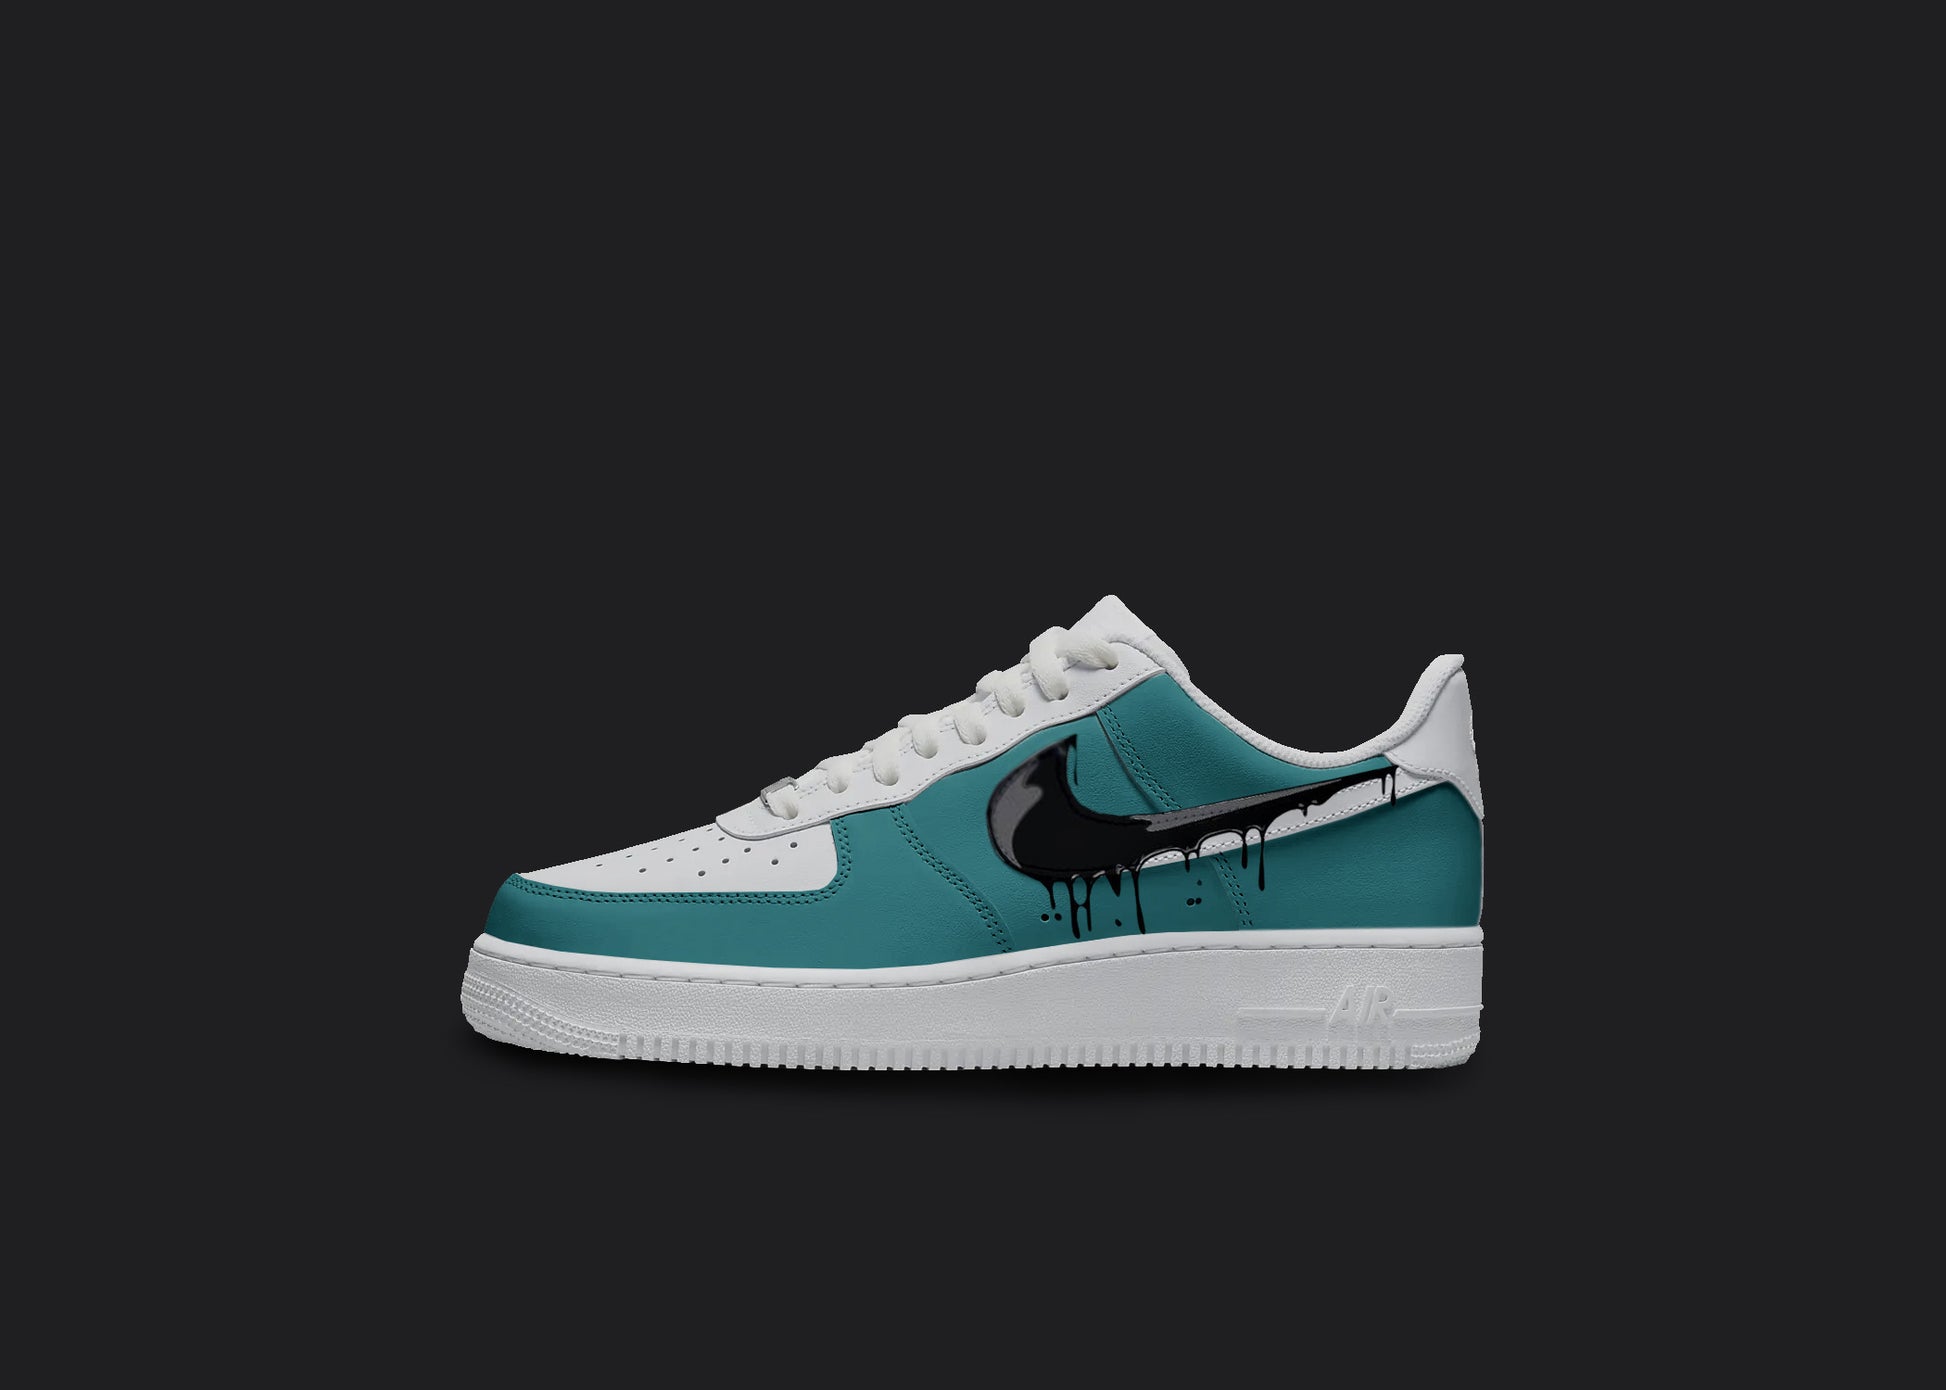 The image is of a Custom Nike Air force 1 sneaker on a blank black background. The blue custom sneaker has a black dripping design on the side.